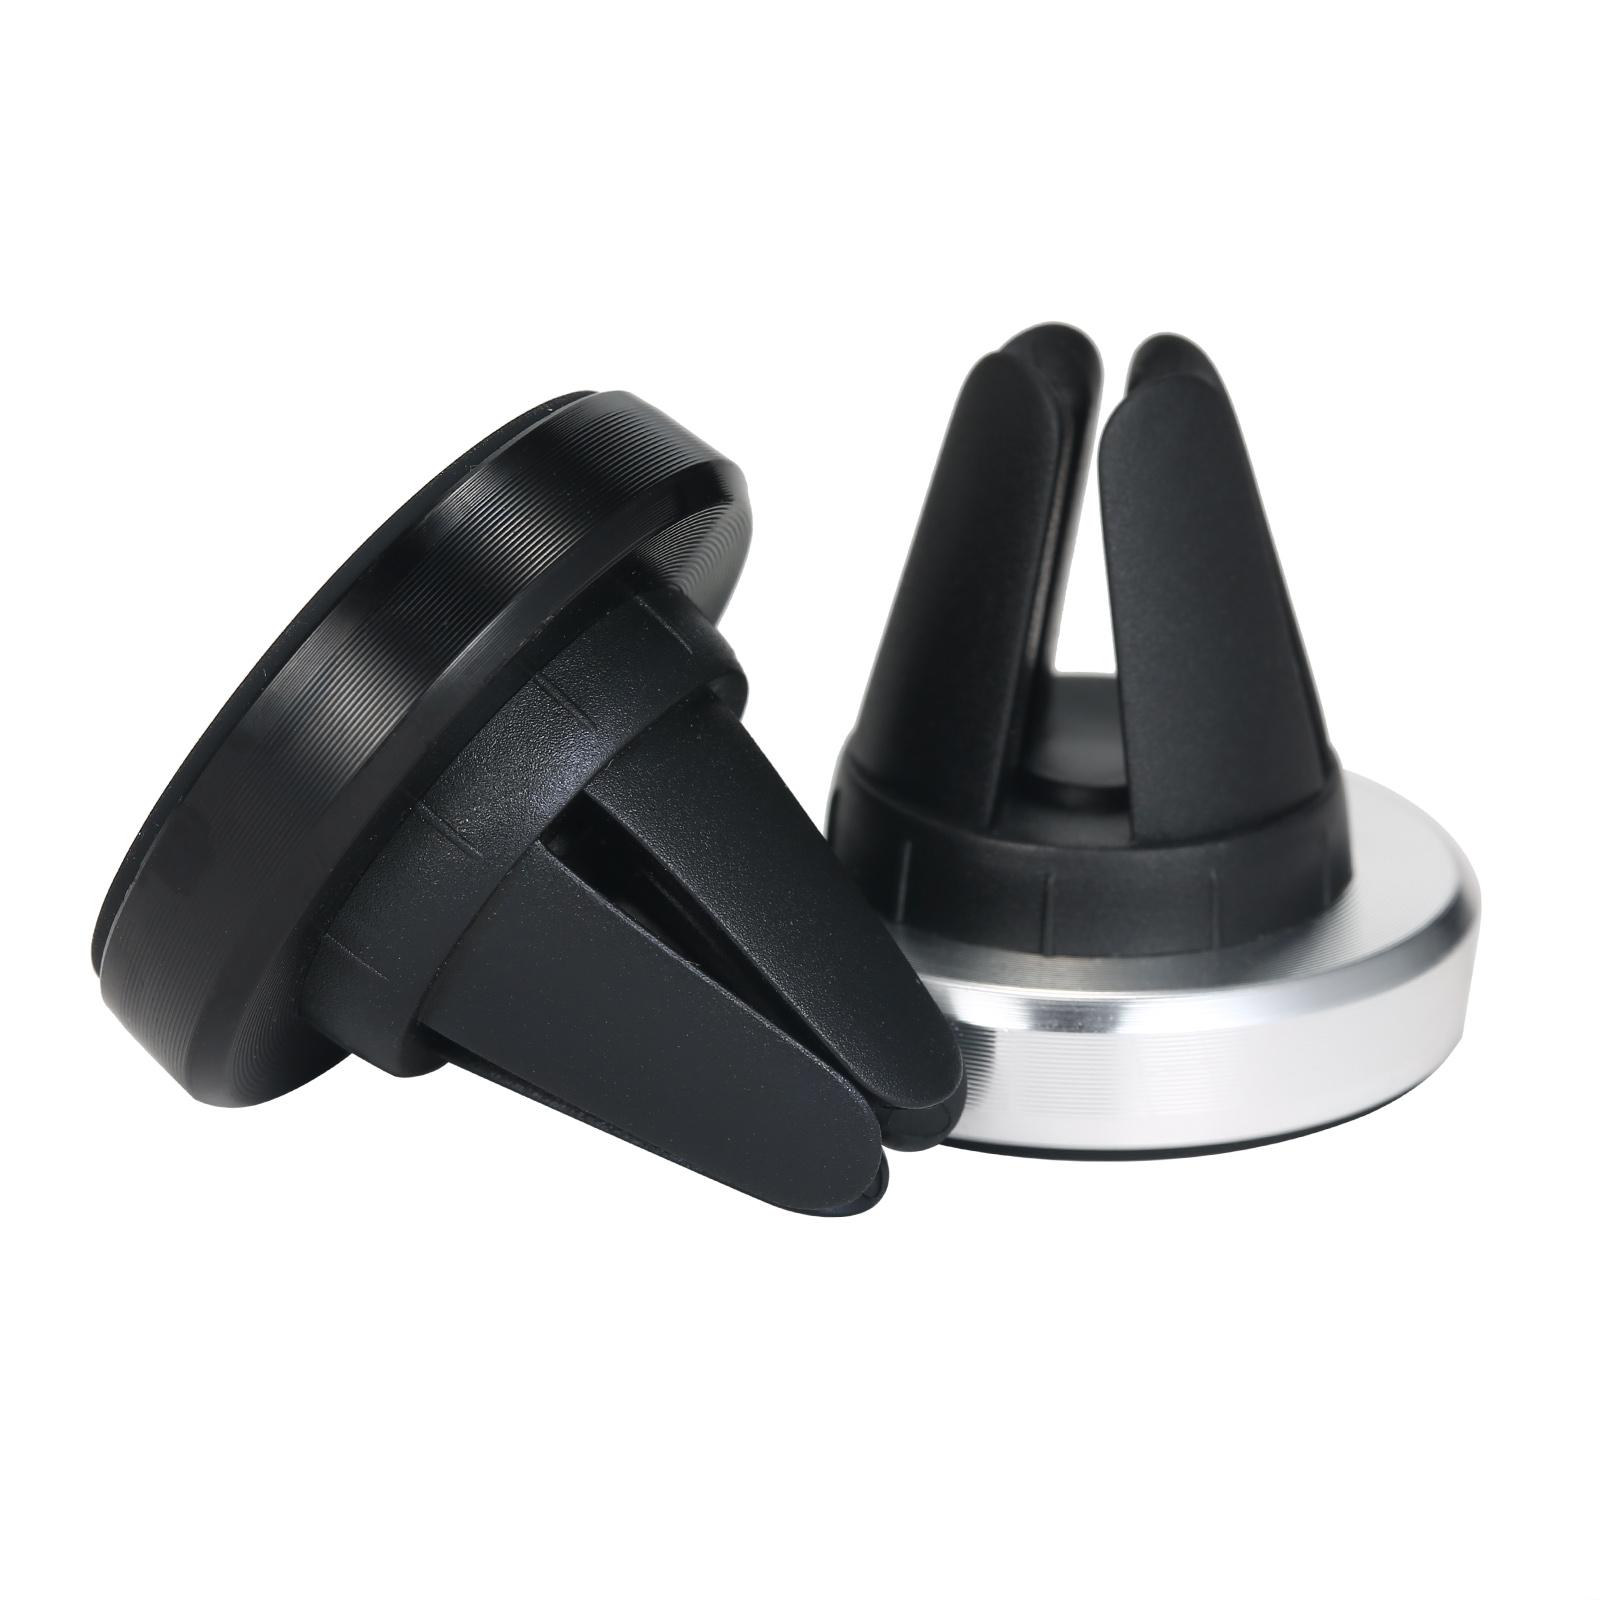 Magnetic Car Phone Holder Air Vent Magnet Mobile Phone Car Holder for Cell Phone Stand Universal Car Mount Holder Stand